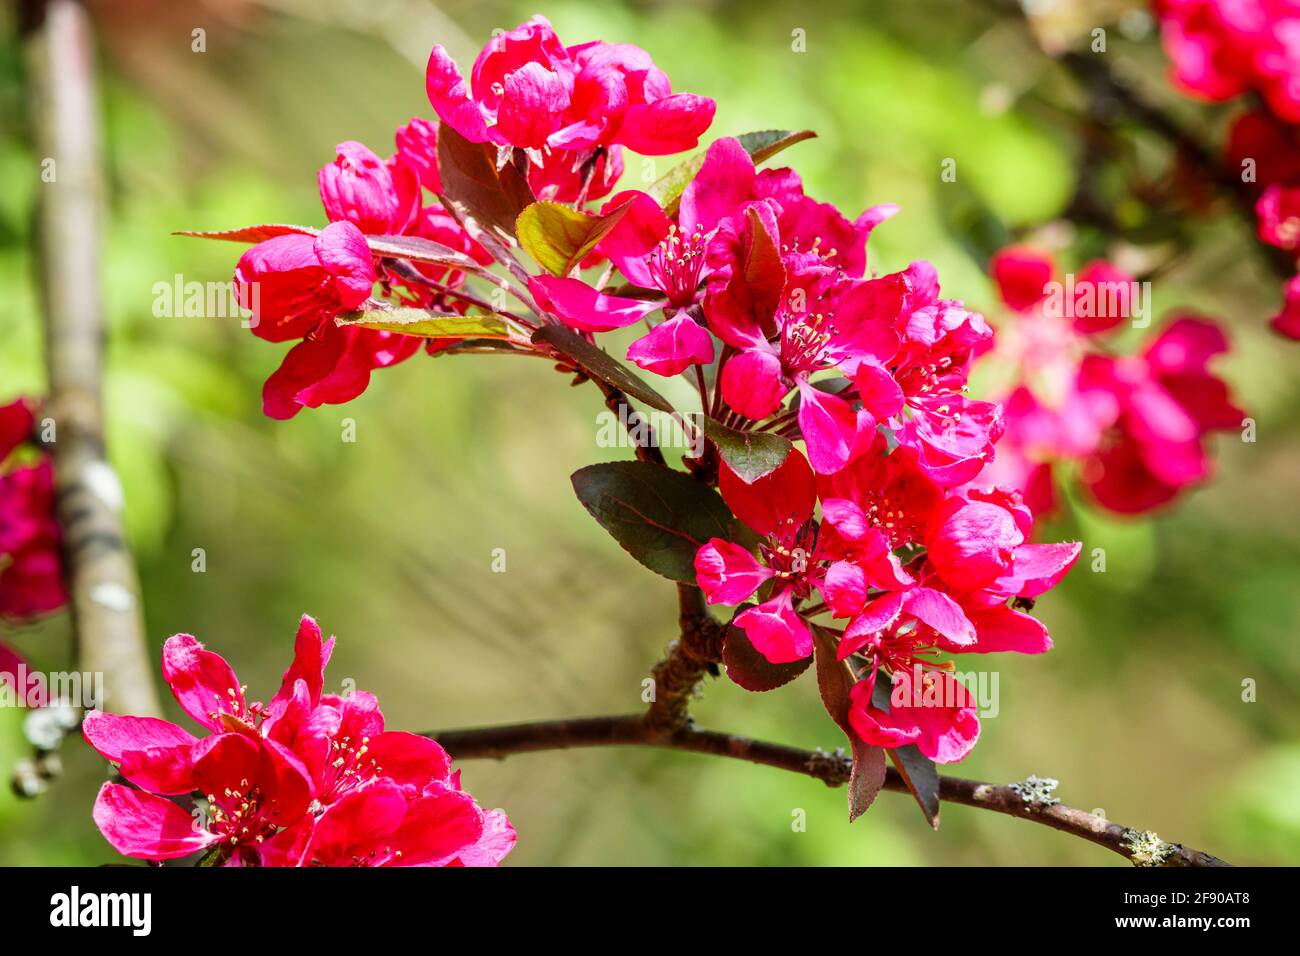 Close-up view of the dark red petals of flowers in a crab apple (Malus) tree blossoming in Spring in a garden in Surrey, south-east England Stock Photo